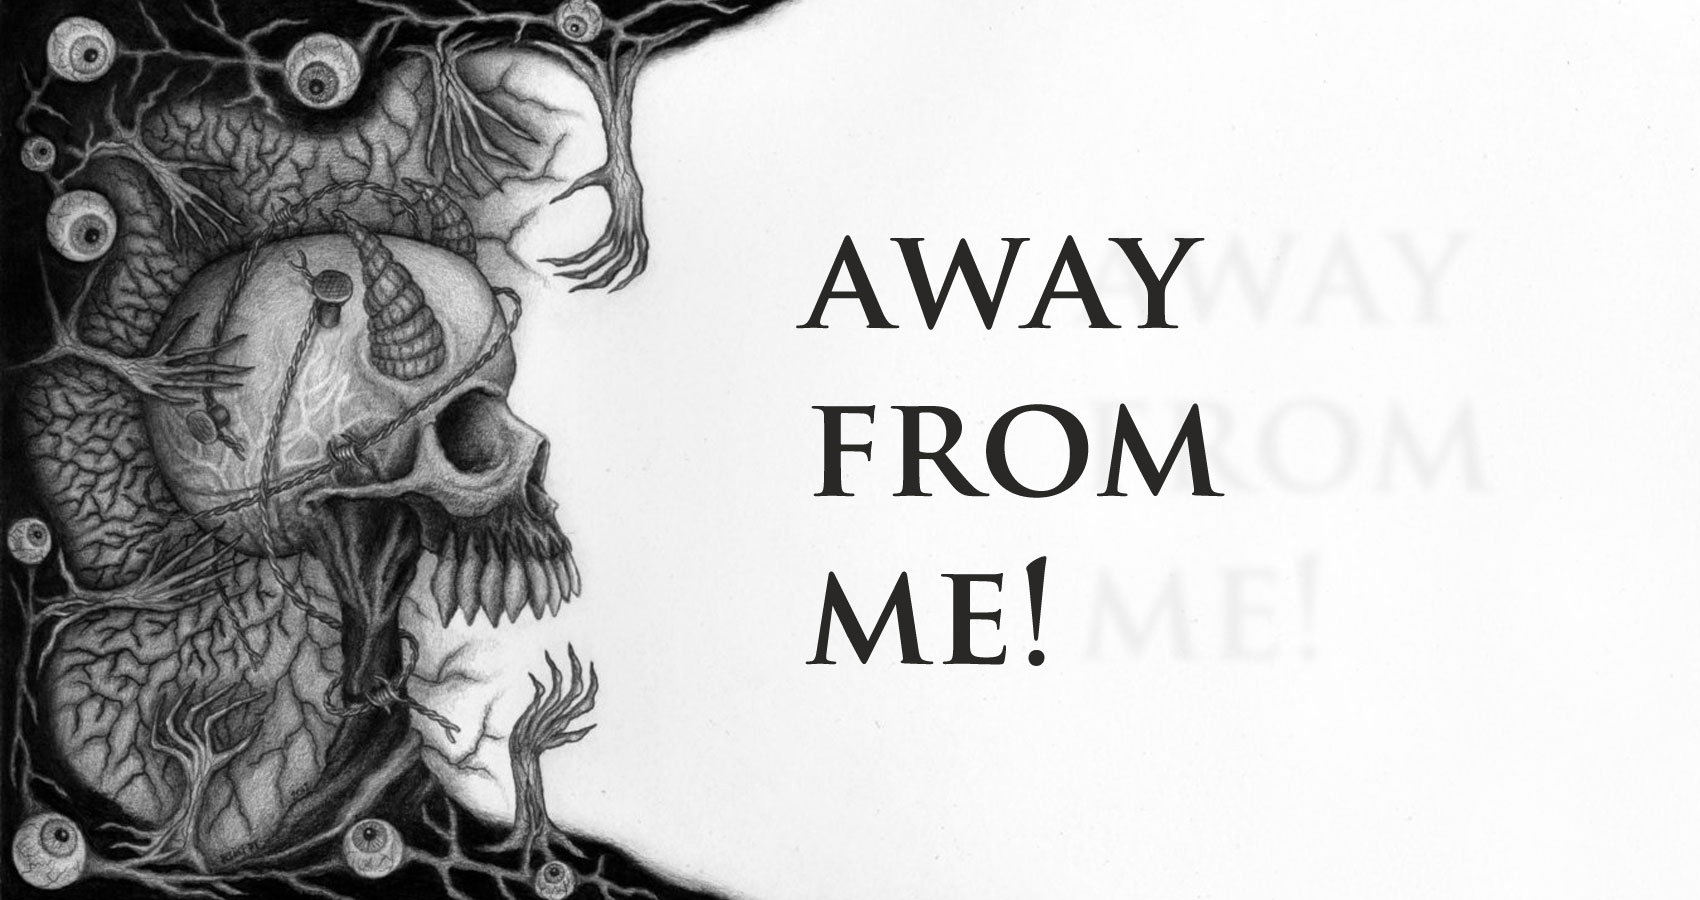 Away from me! by Elaine M. Mullen at Spillwords.com